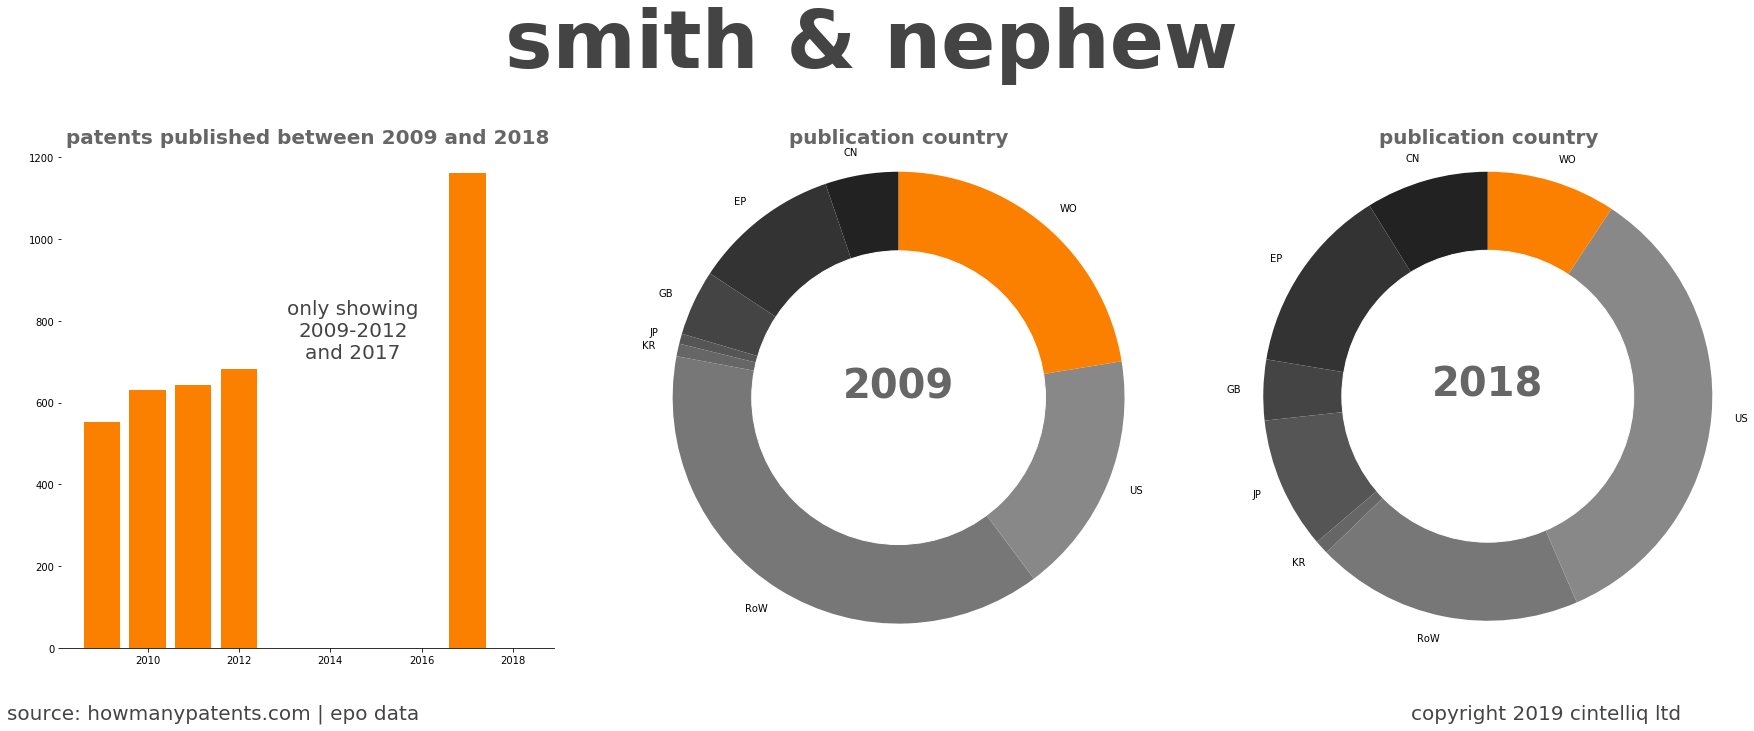 summary of patents for Smith & Nephew